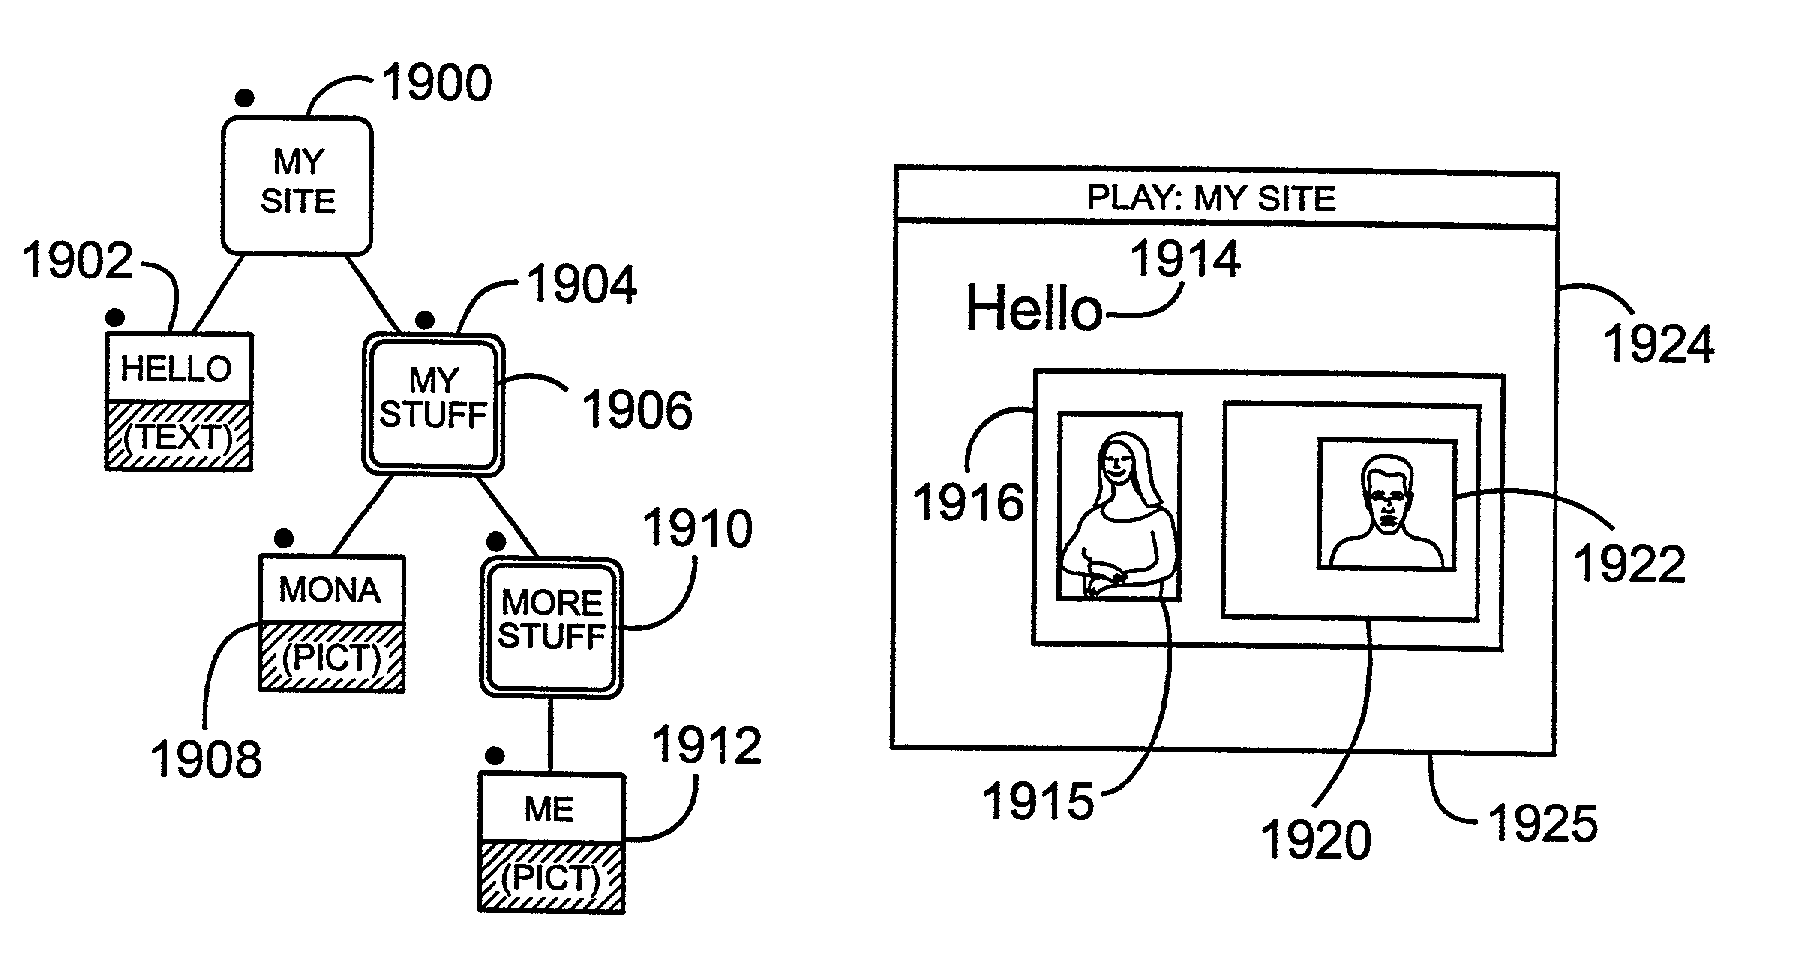 System and method for multimedia authoring and playback